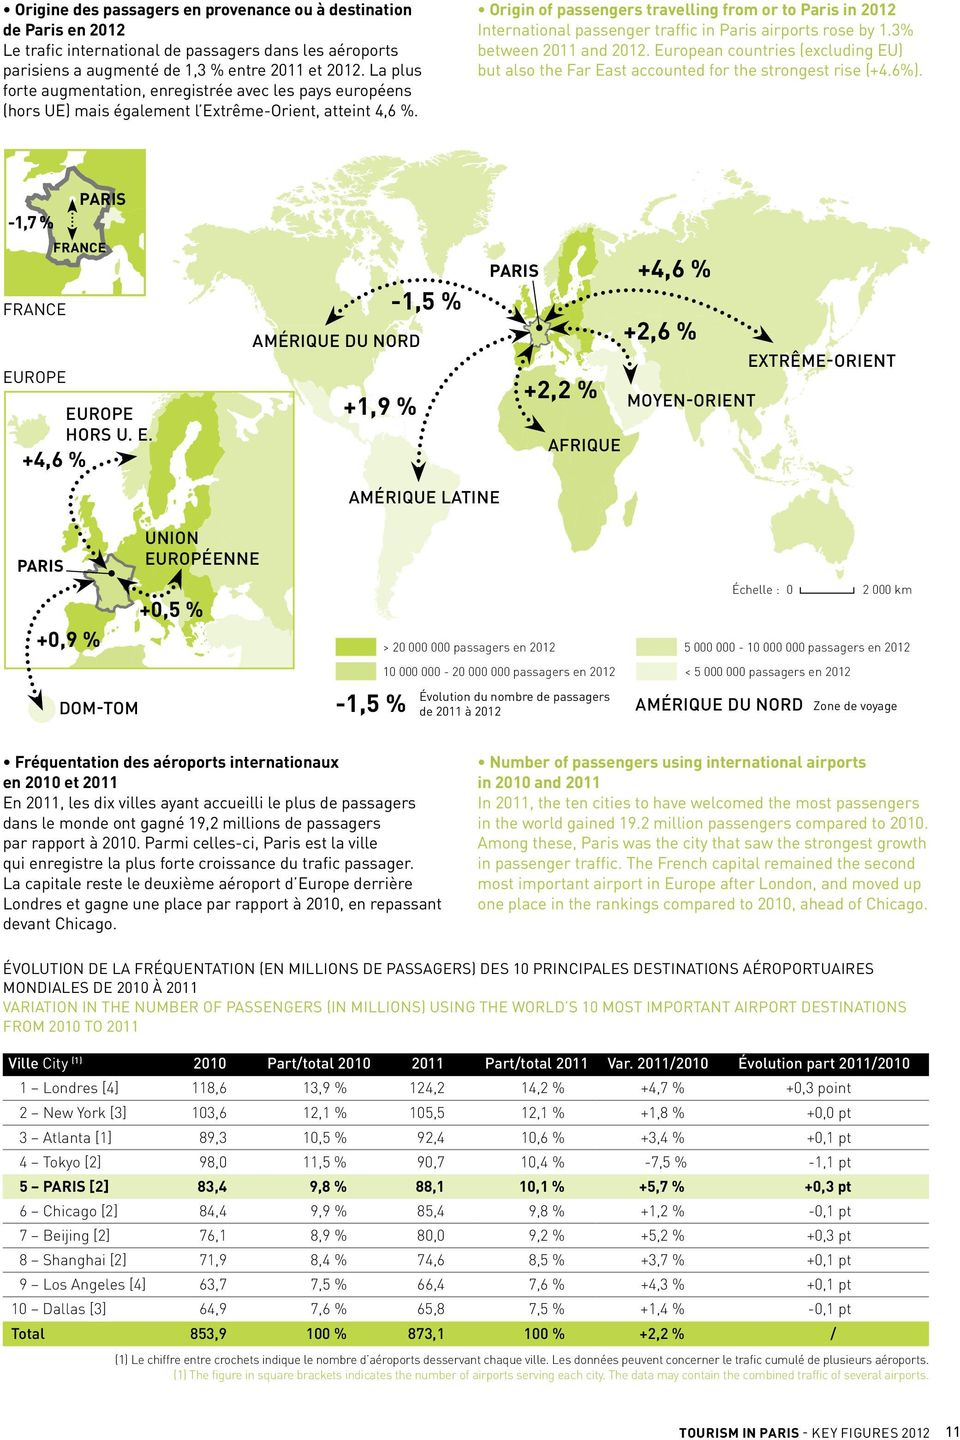 Origin of passengers travelling from or to Paris in 2012 International passenger traffic in Paris airports rose by 1.3% between 2011 and 2012.